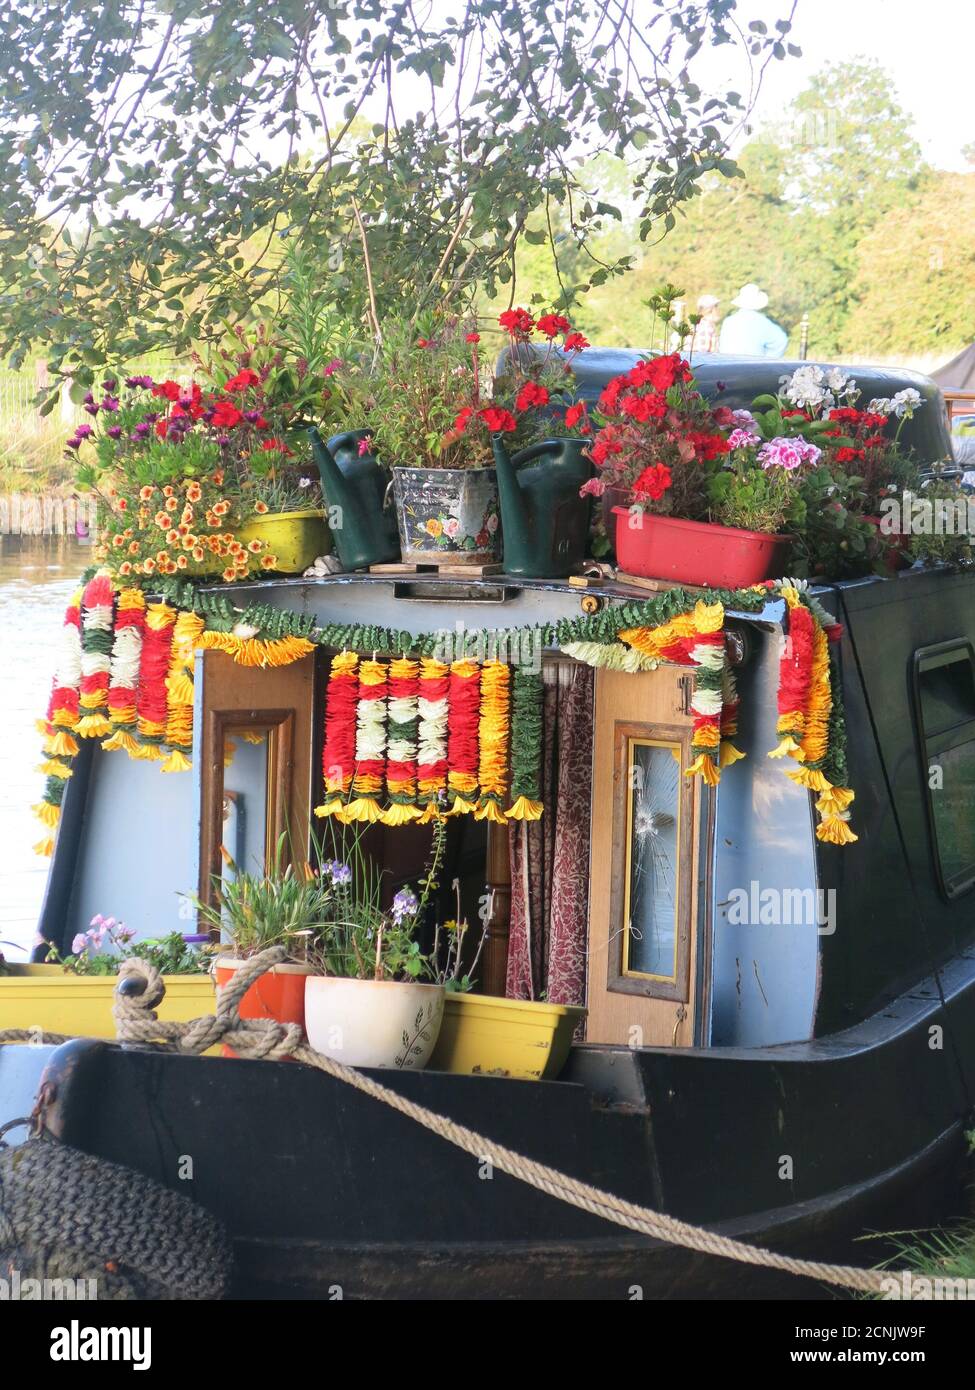 The colourful stern of an English narrowboat on the Grand Union Canal, decorated with pots of red geraniums and garlands of bright paper flowers. Stock Photo